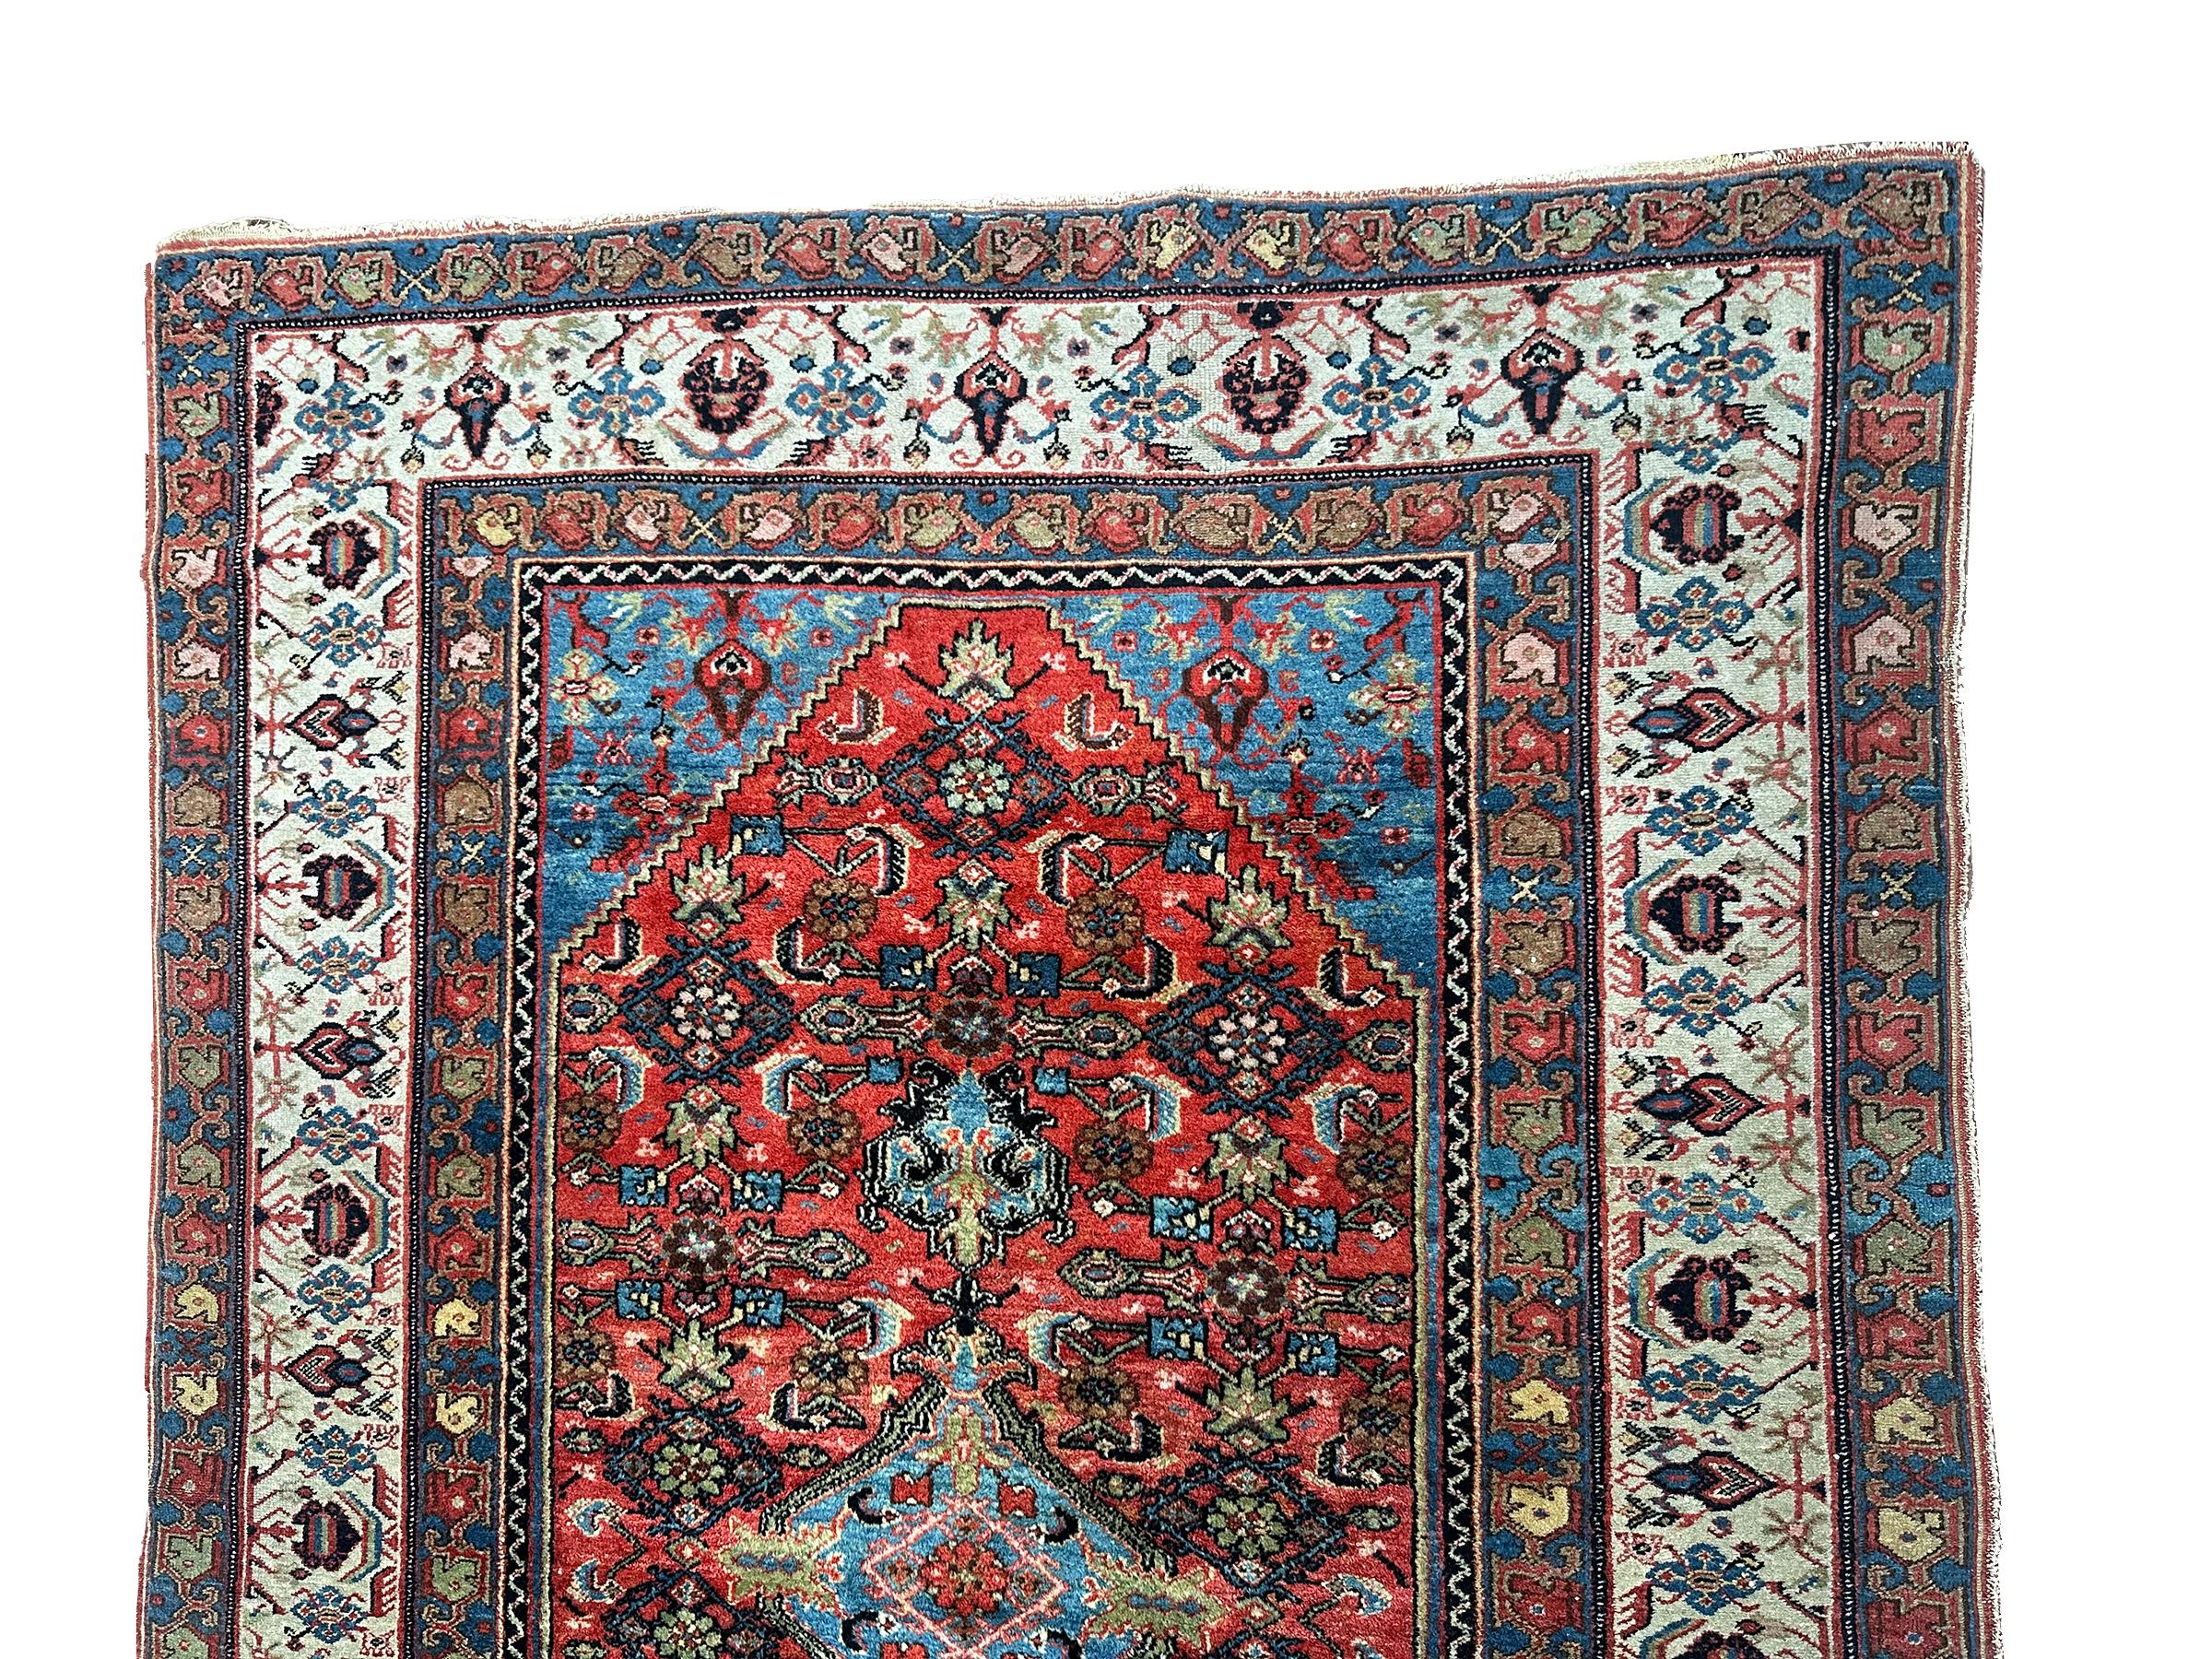 Wool 1890 Antique Traditional Oriental Rug Exceptionally fine Rug 5x6 153cm x 191cm For Sale